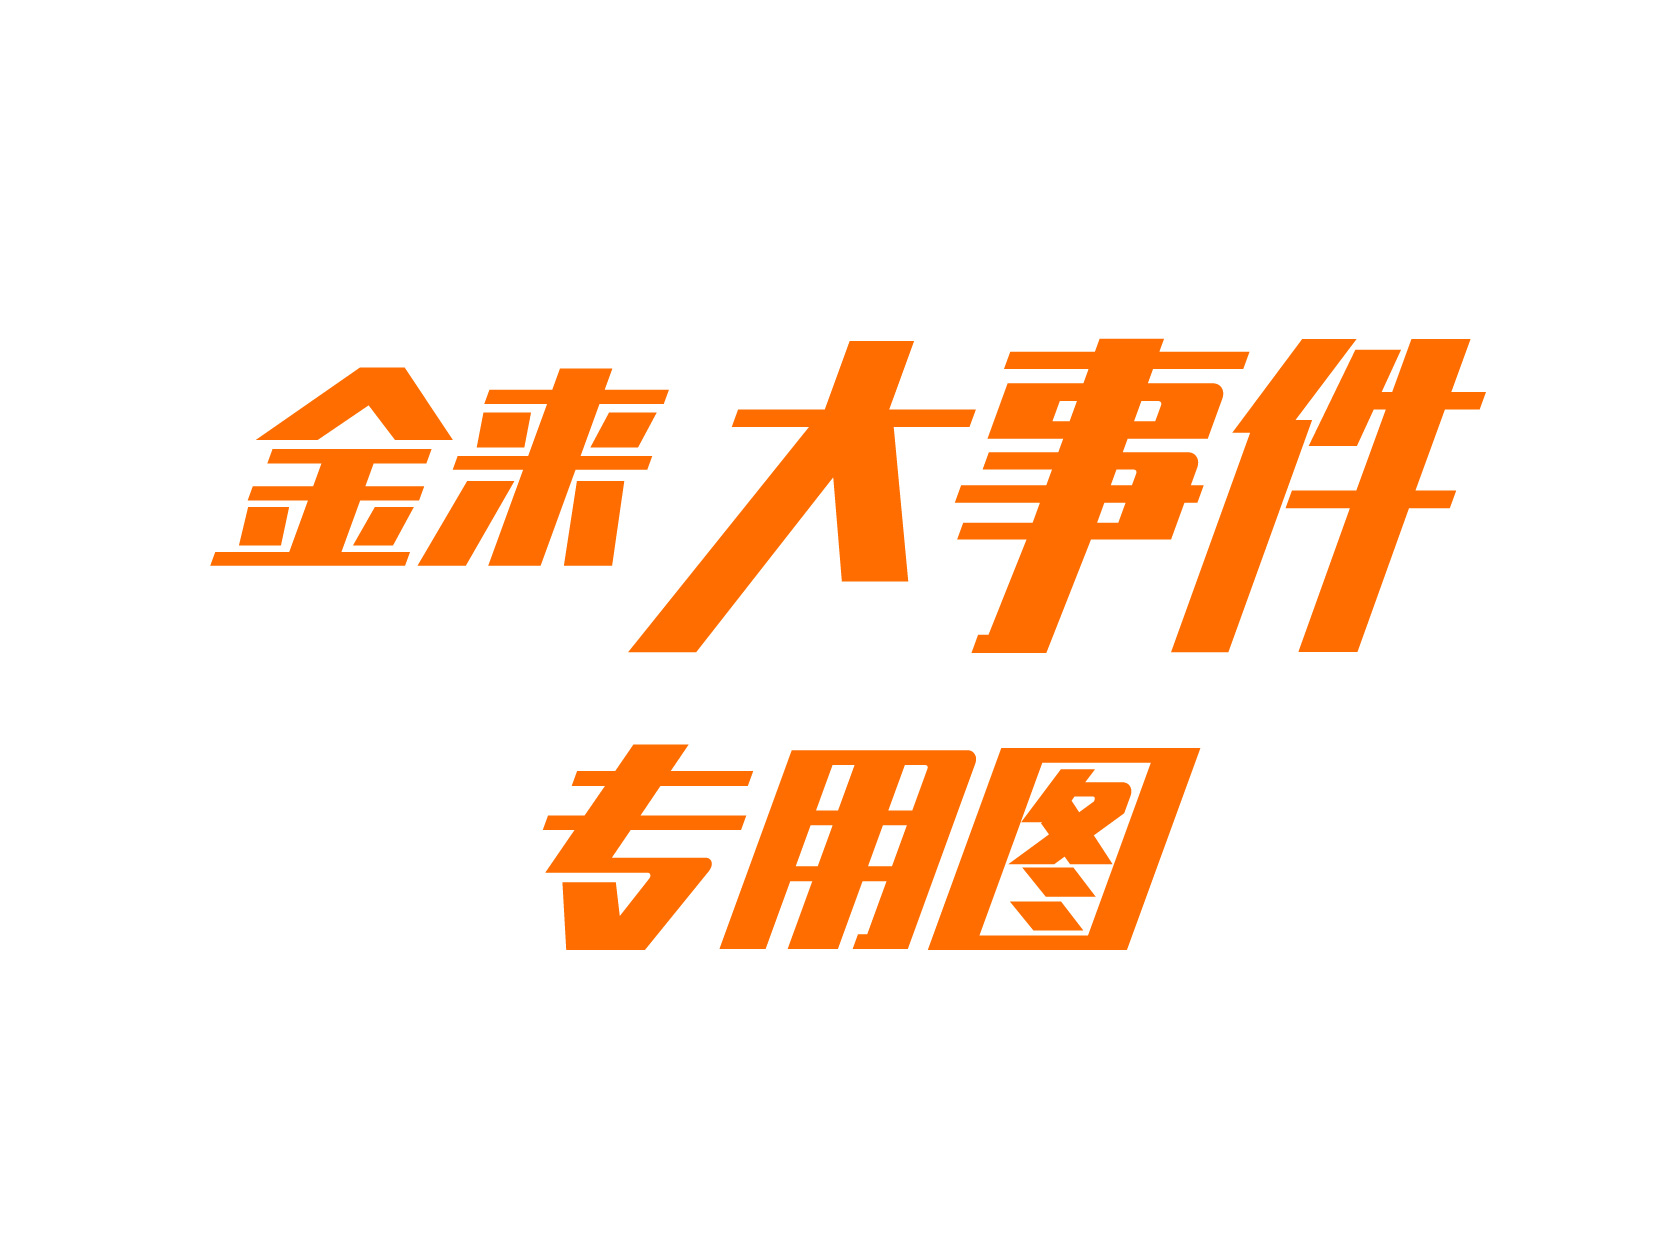 <b>GUANGDONG JINLAI METAL PRODUCTS CO., LTD - The official website of AOSITUO BRAND updated and launche</b>